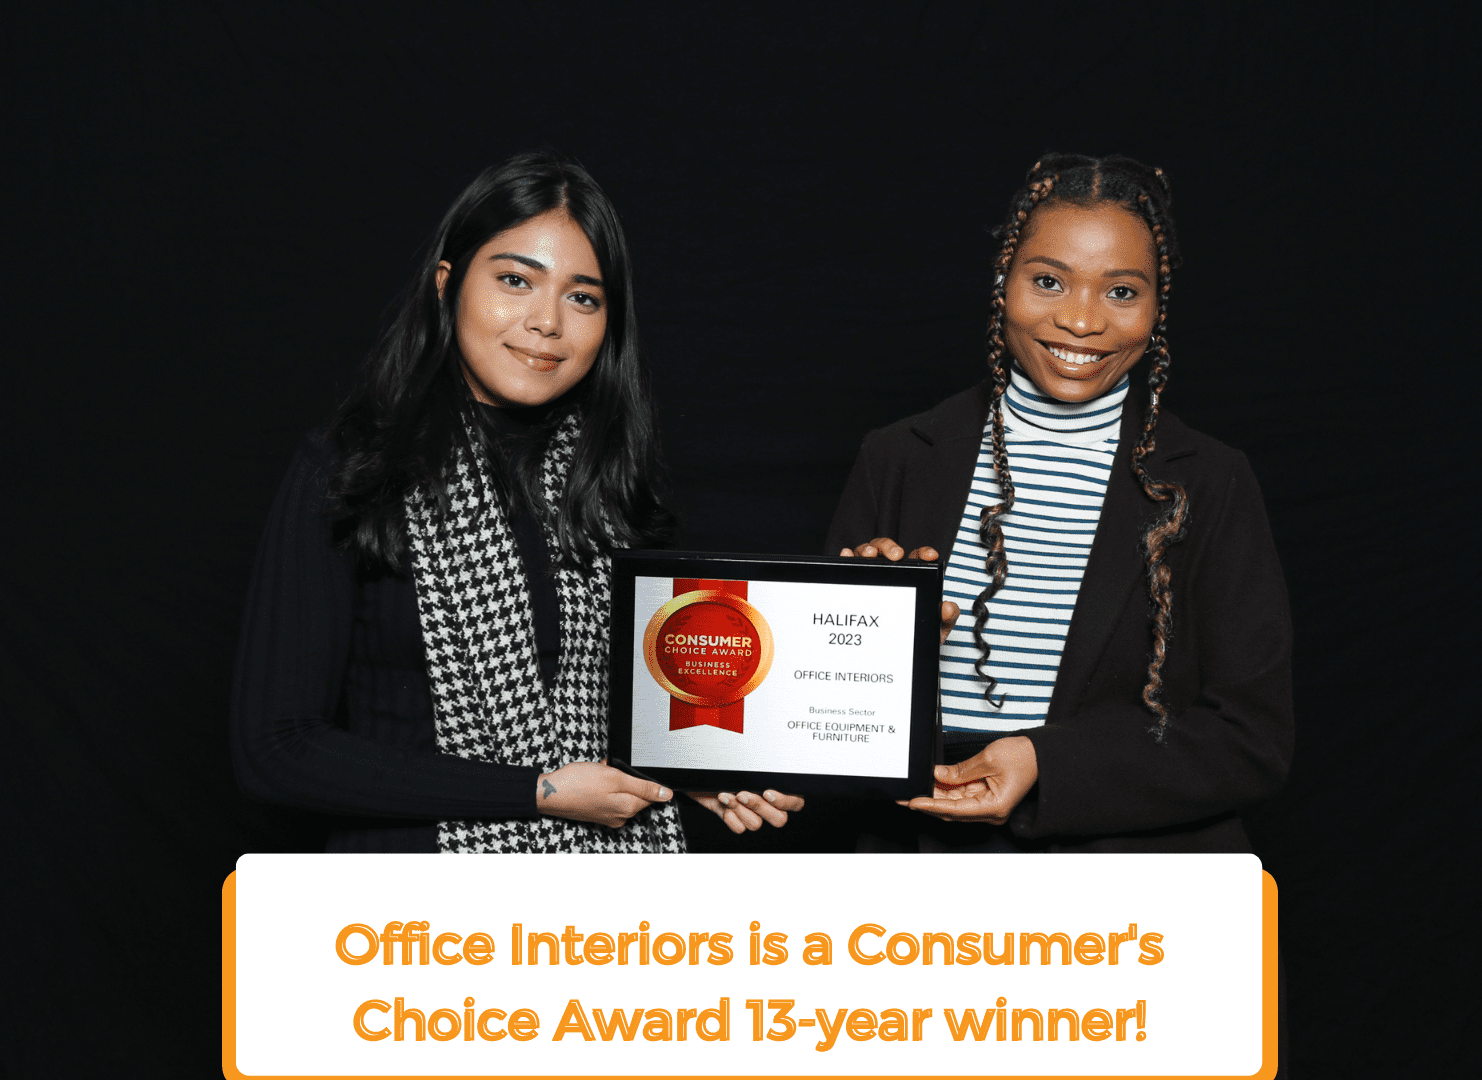 Office Interiors named 2023 Consumer Choice Award for office furniture and equipment category